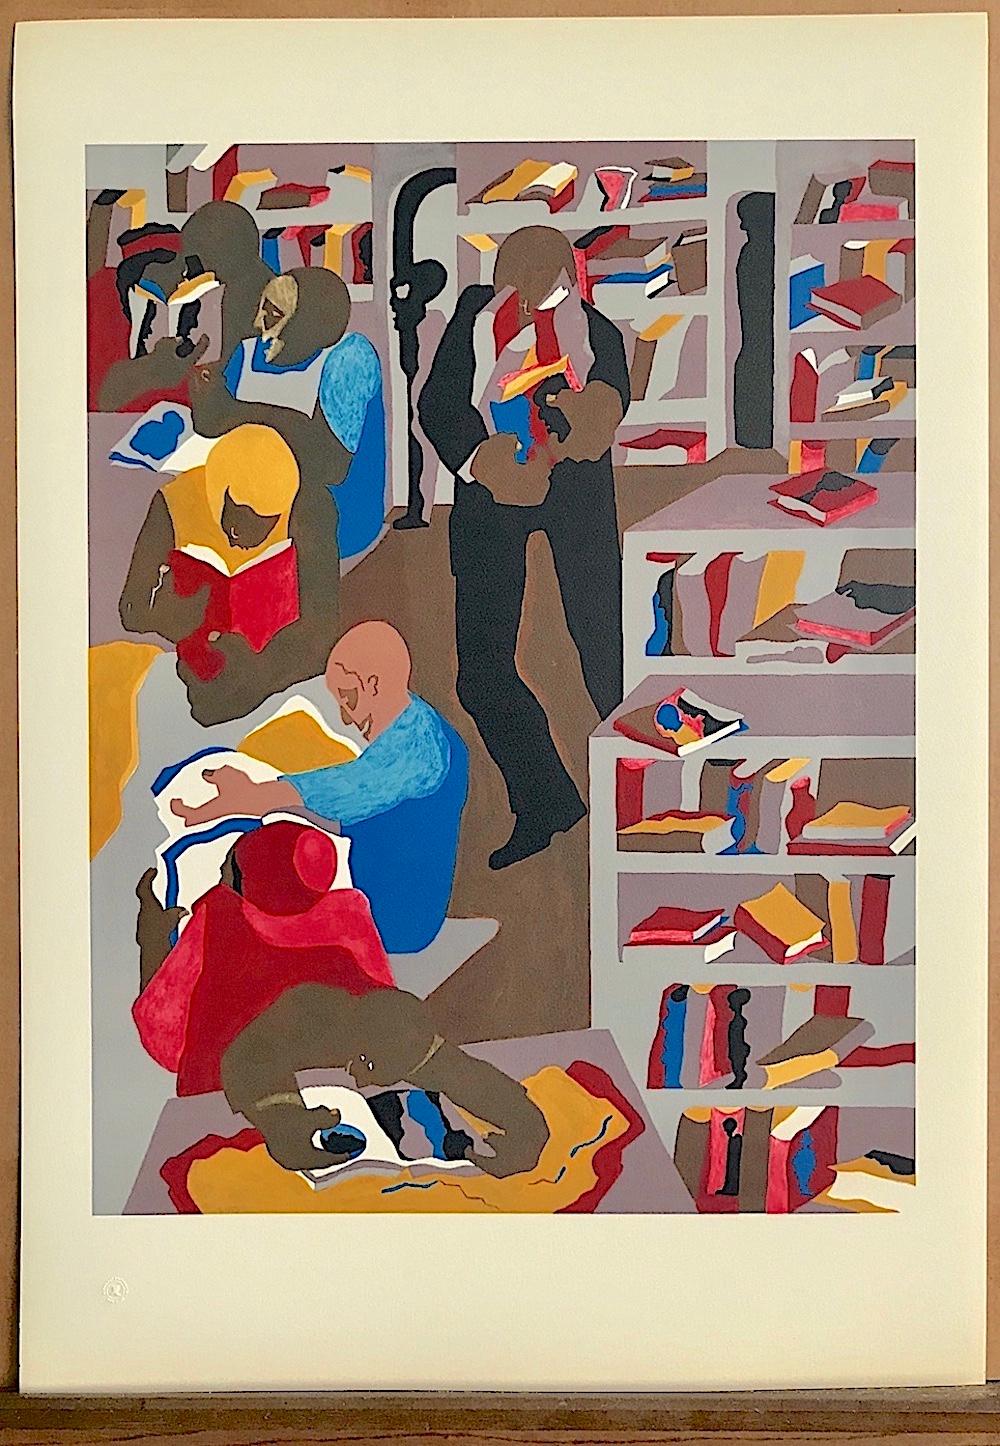 SCHOMBURG LIBRARY Lithograph, African American History, Black Culture, Books - Contemporary Print by Jacob Lawrence